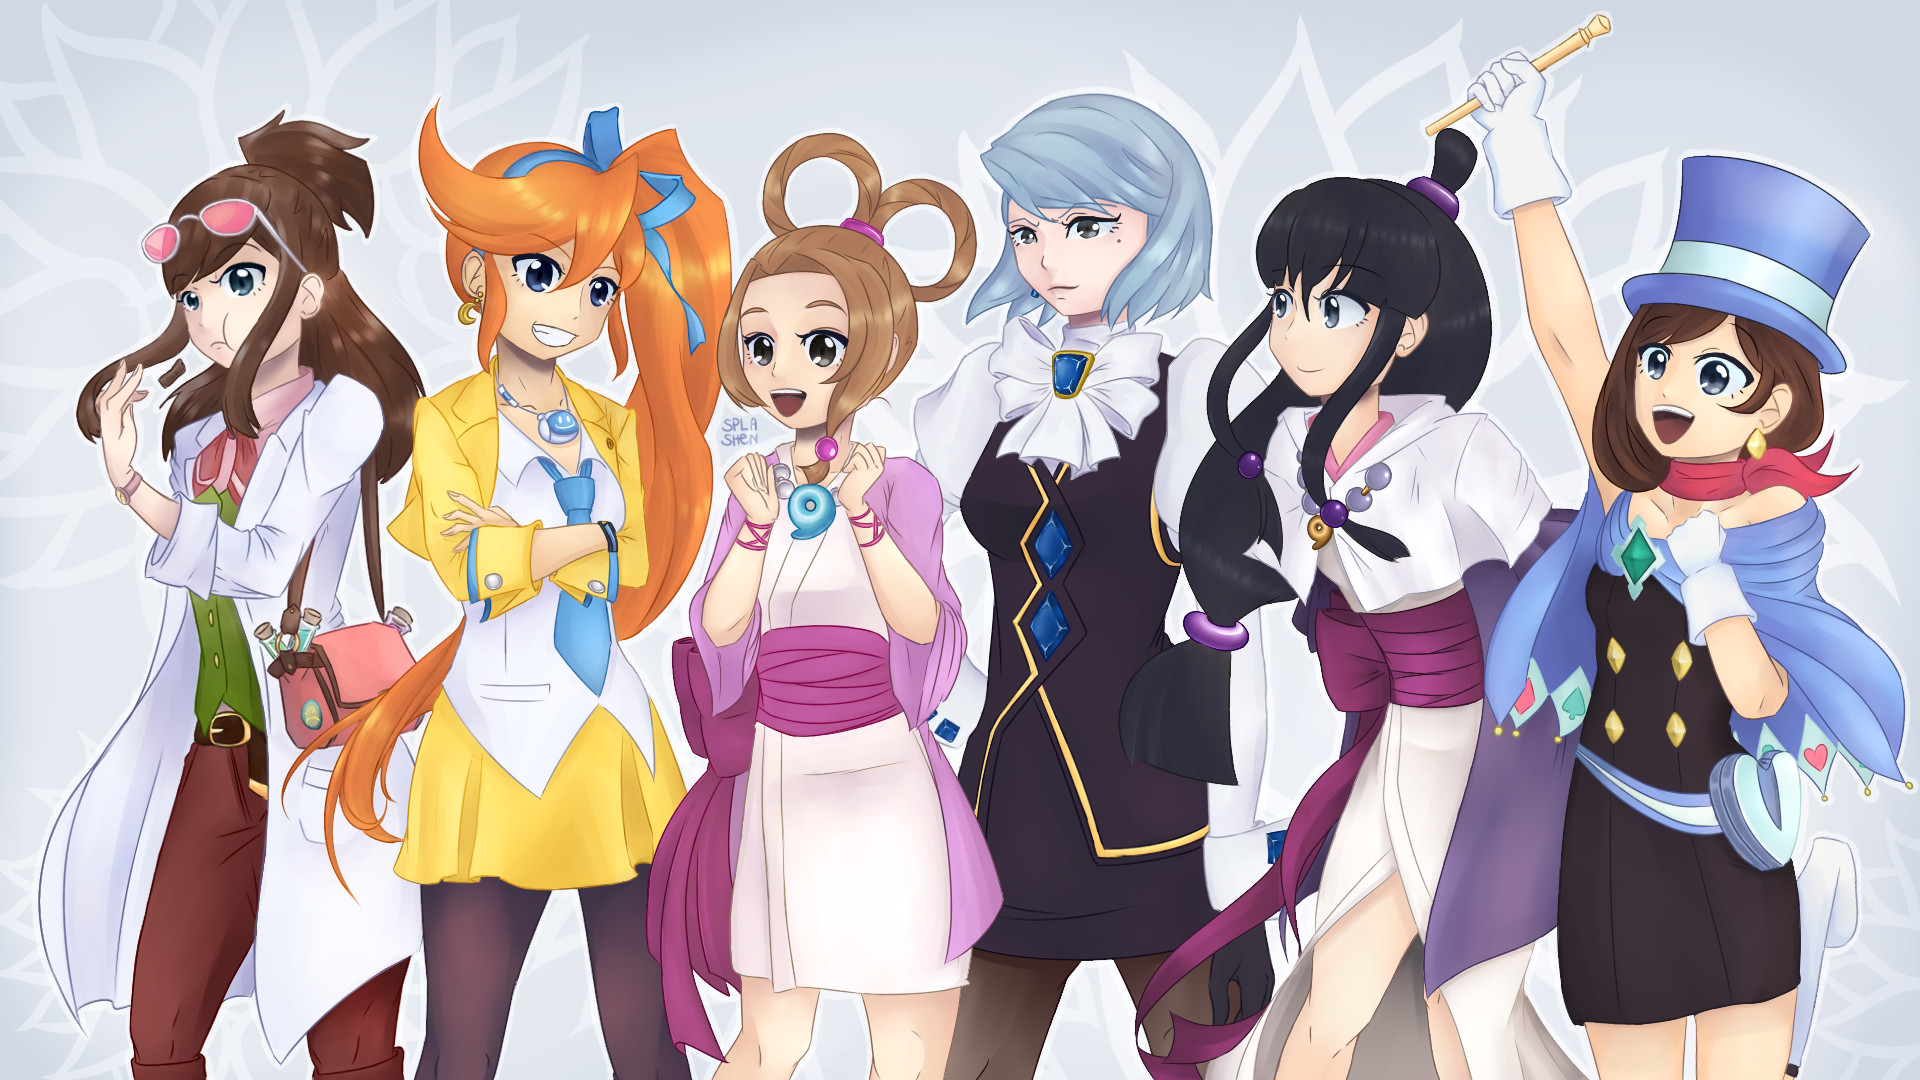 1920x1080 Girls of Ace Attorney by senapon